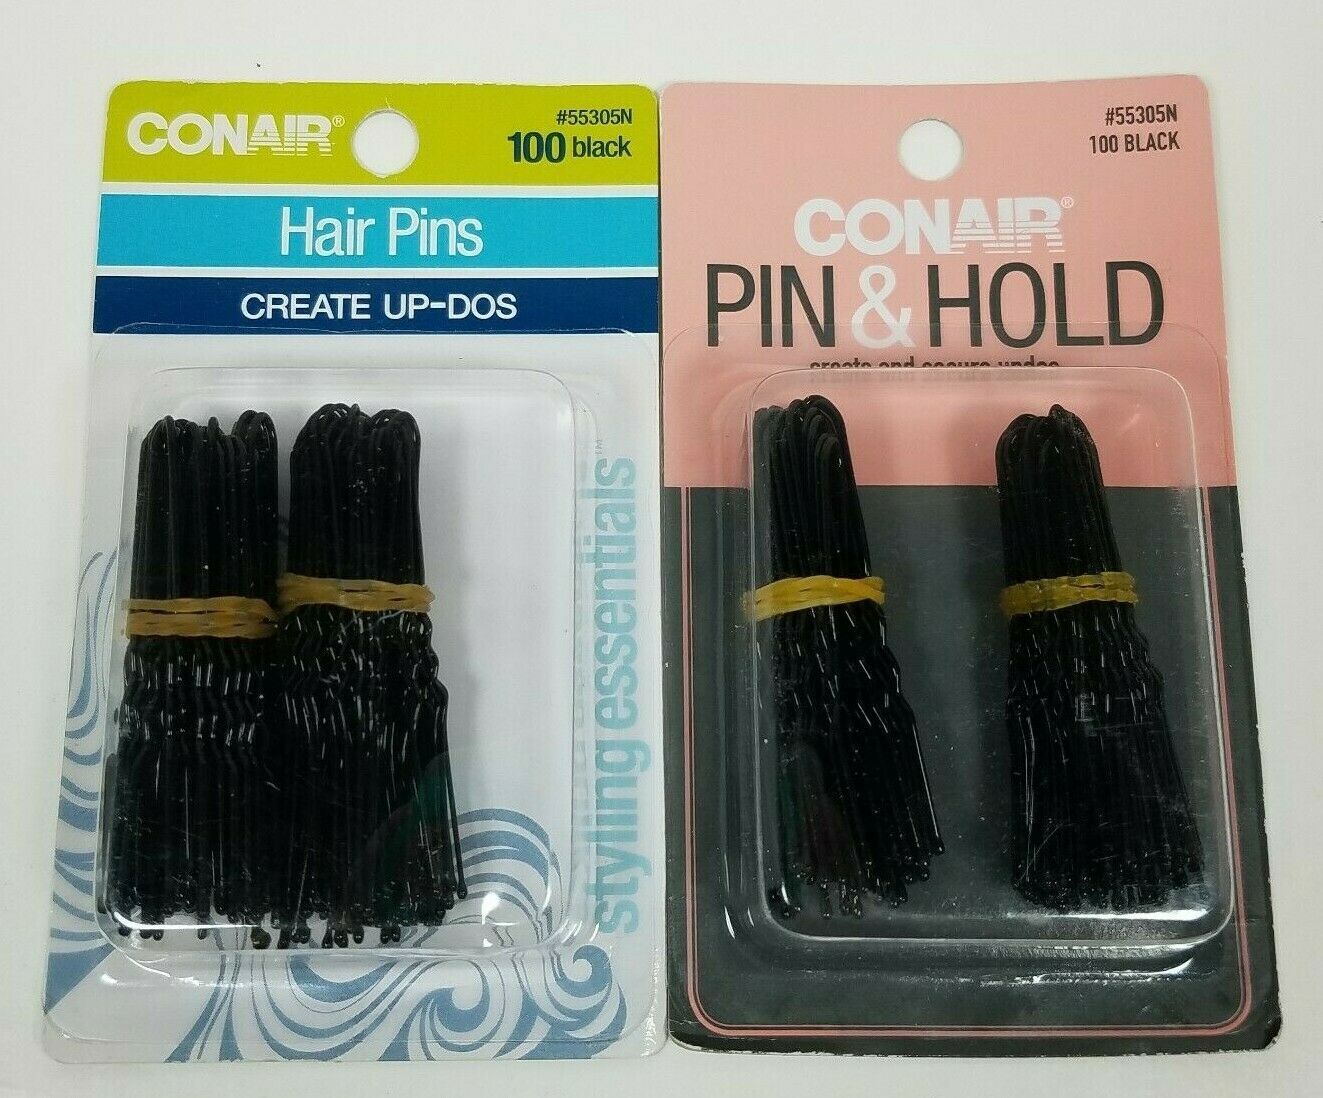 Primary image for Conair Black 100 ct Hair Pins #55305N Lot of 2 Packaging May Vary